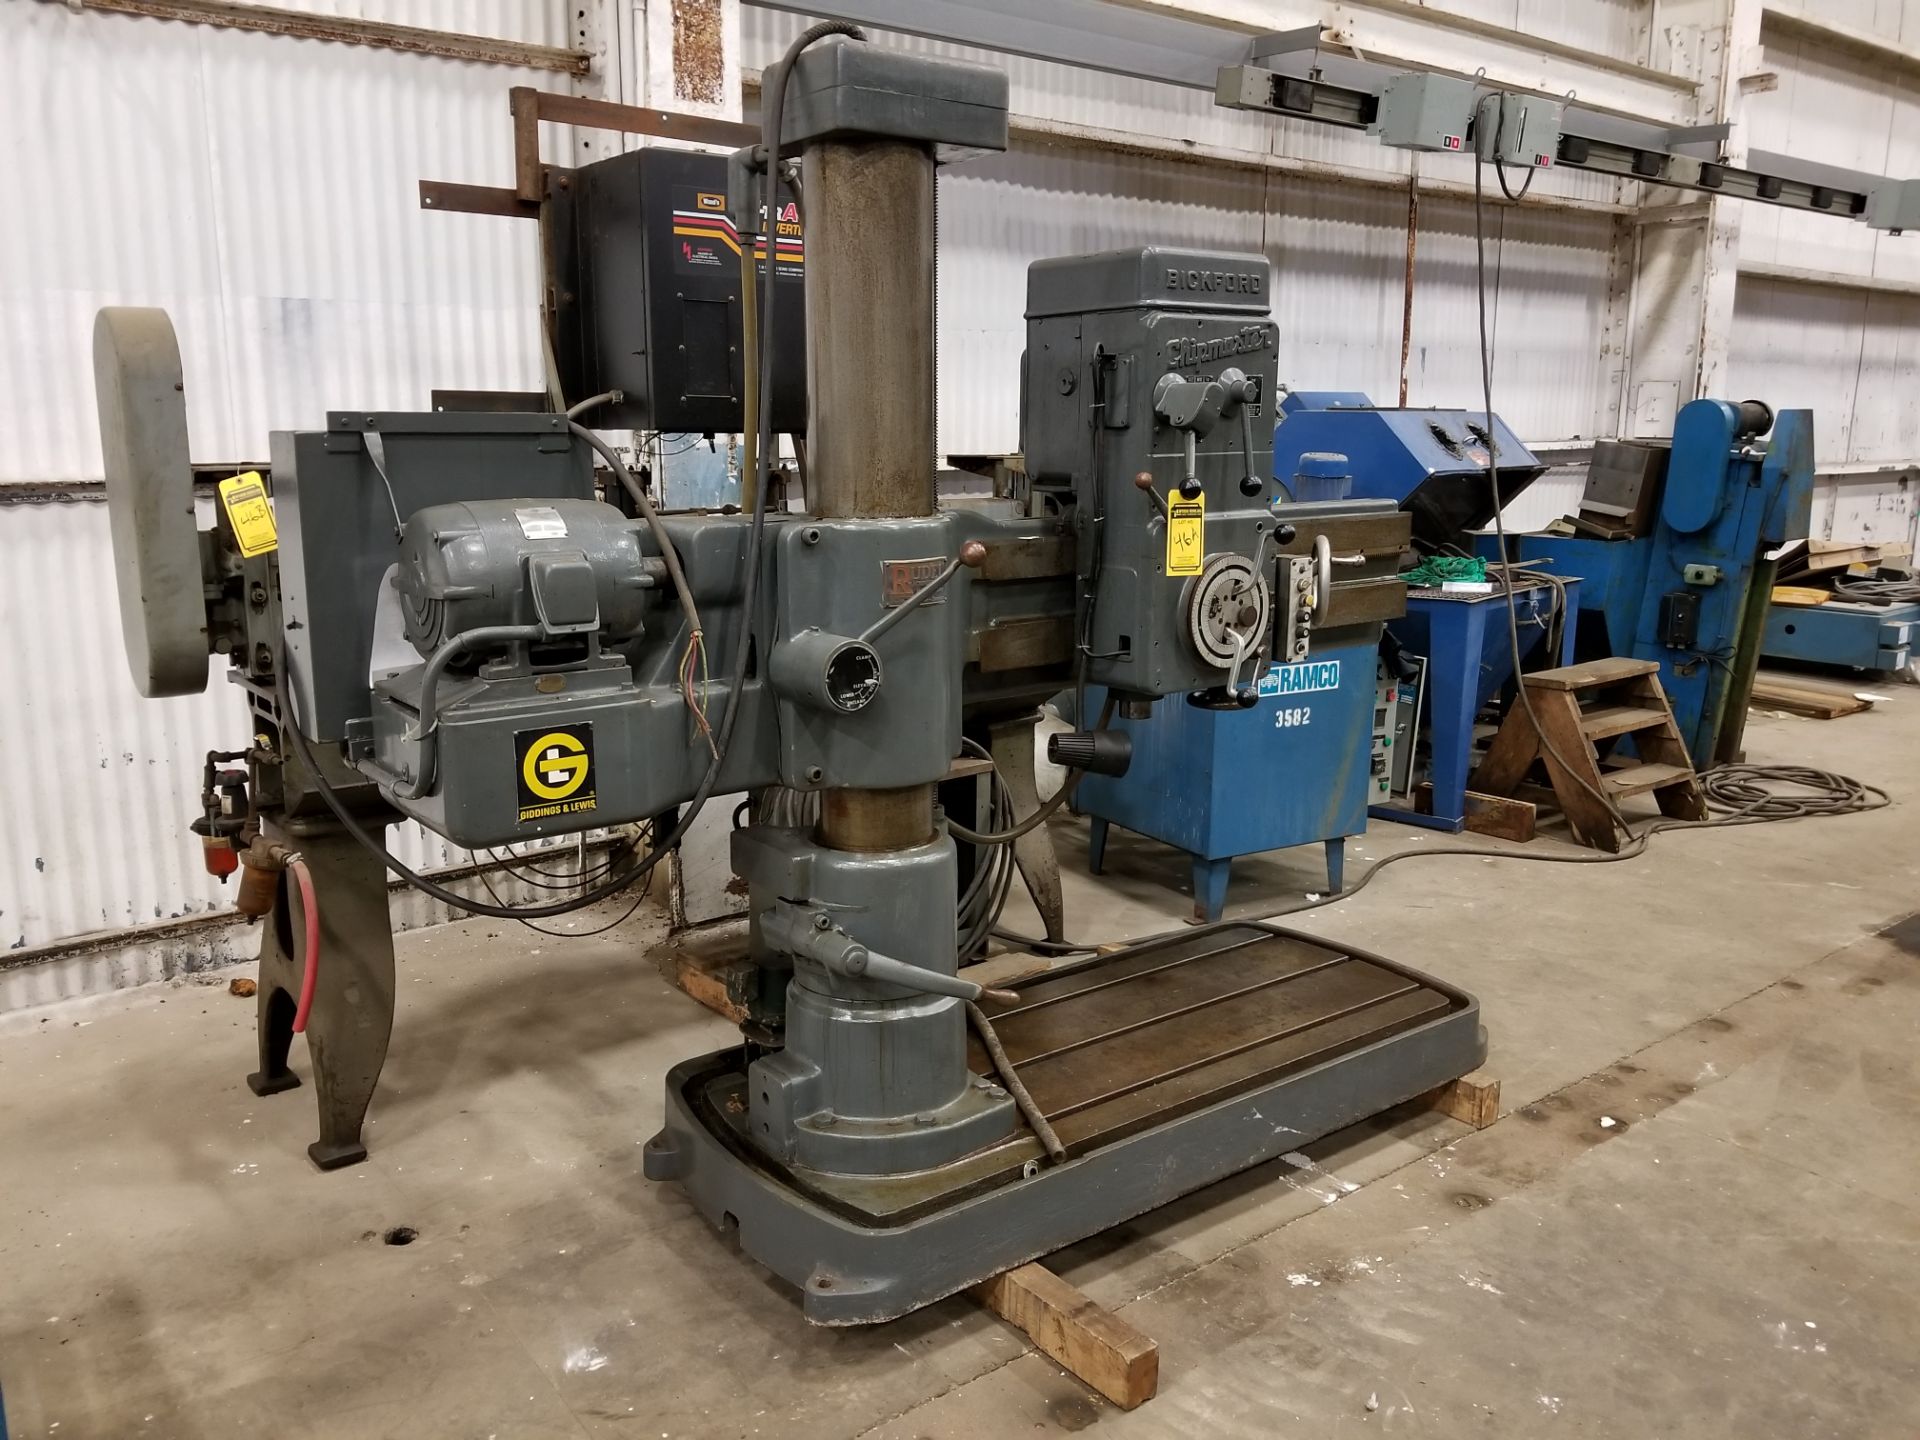 GIDDINGS & LEWIS RADIAL ARM DRILL, CHIPMASTER POWER CARRIAGE HEAD, 99-1800 RPM, ADJUSTABLE TO 5''